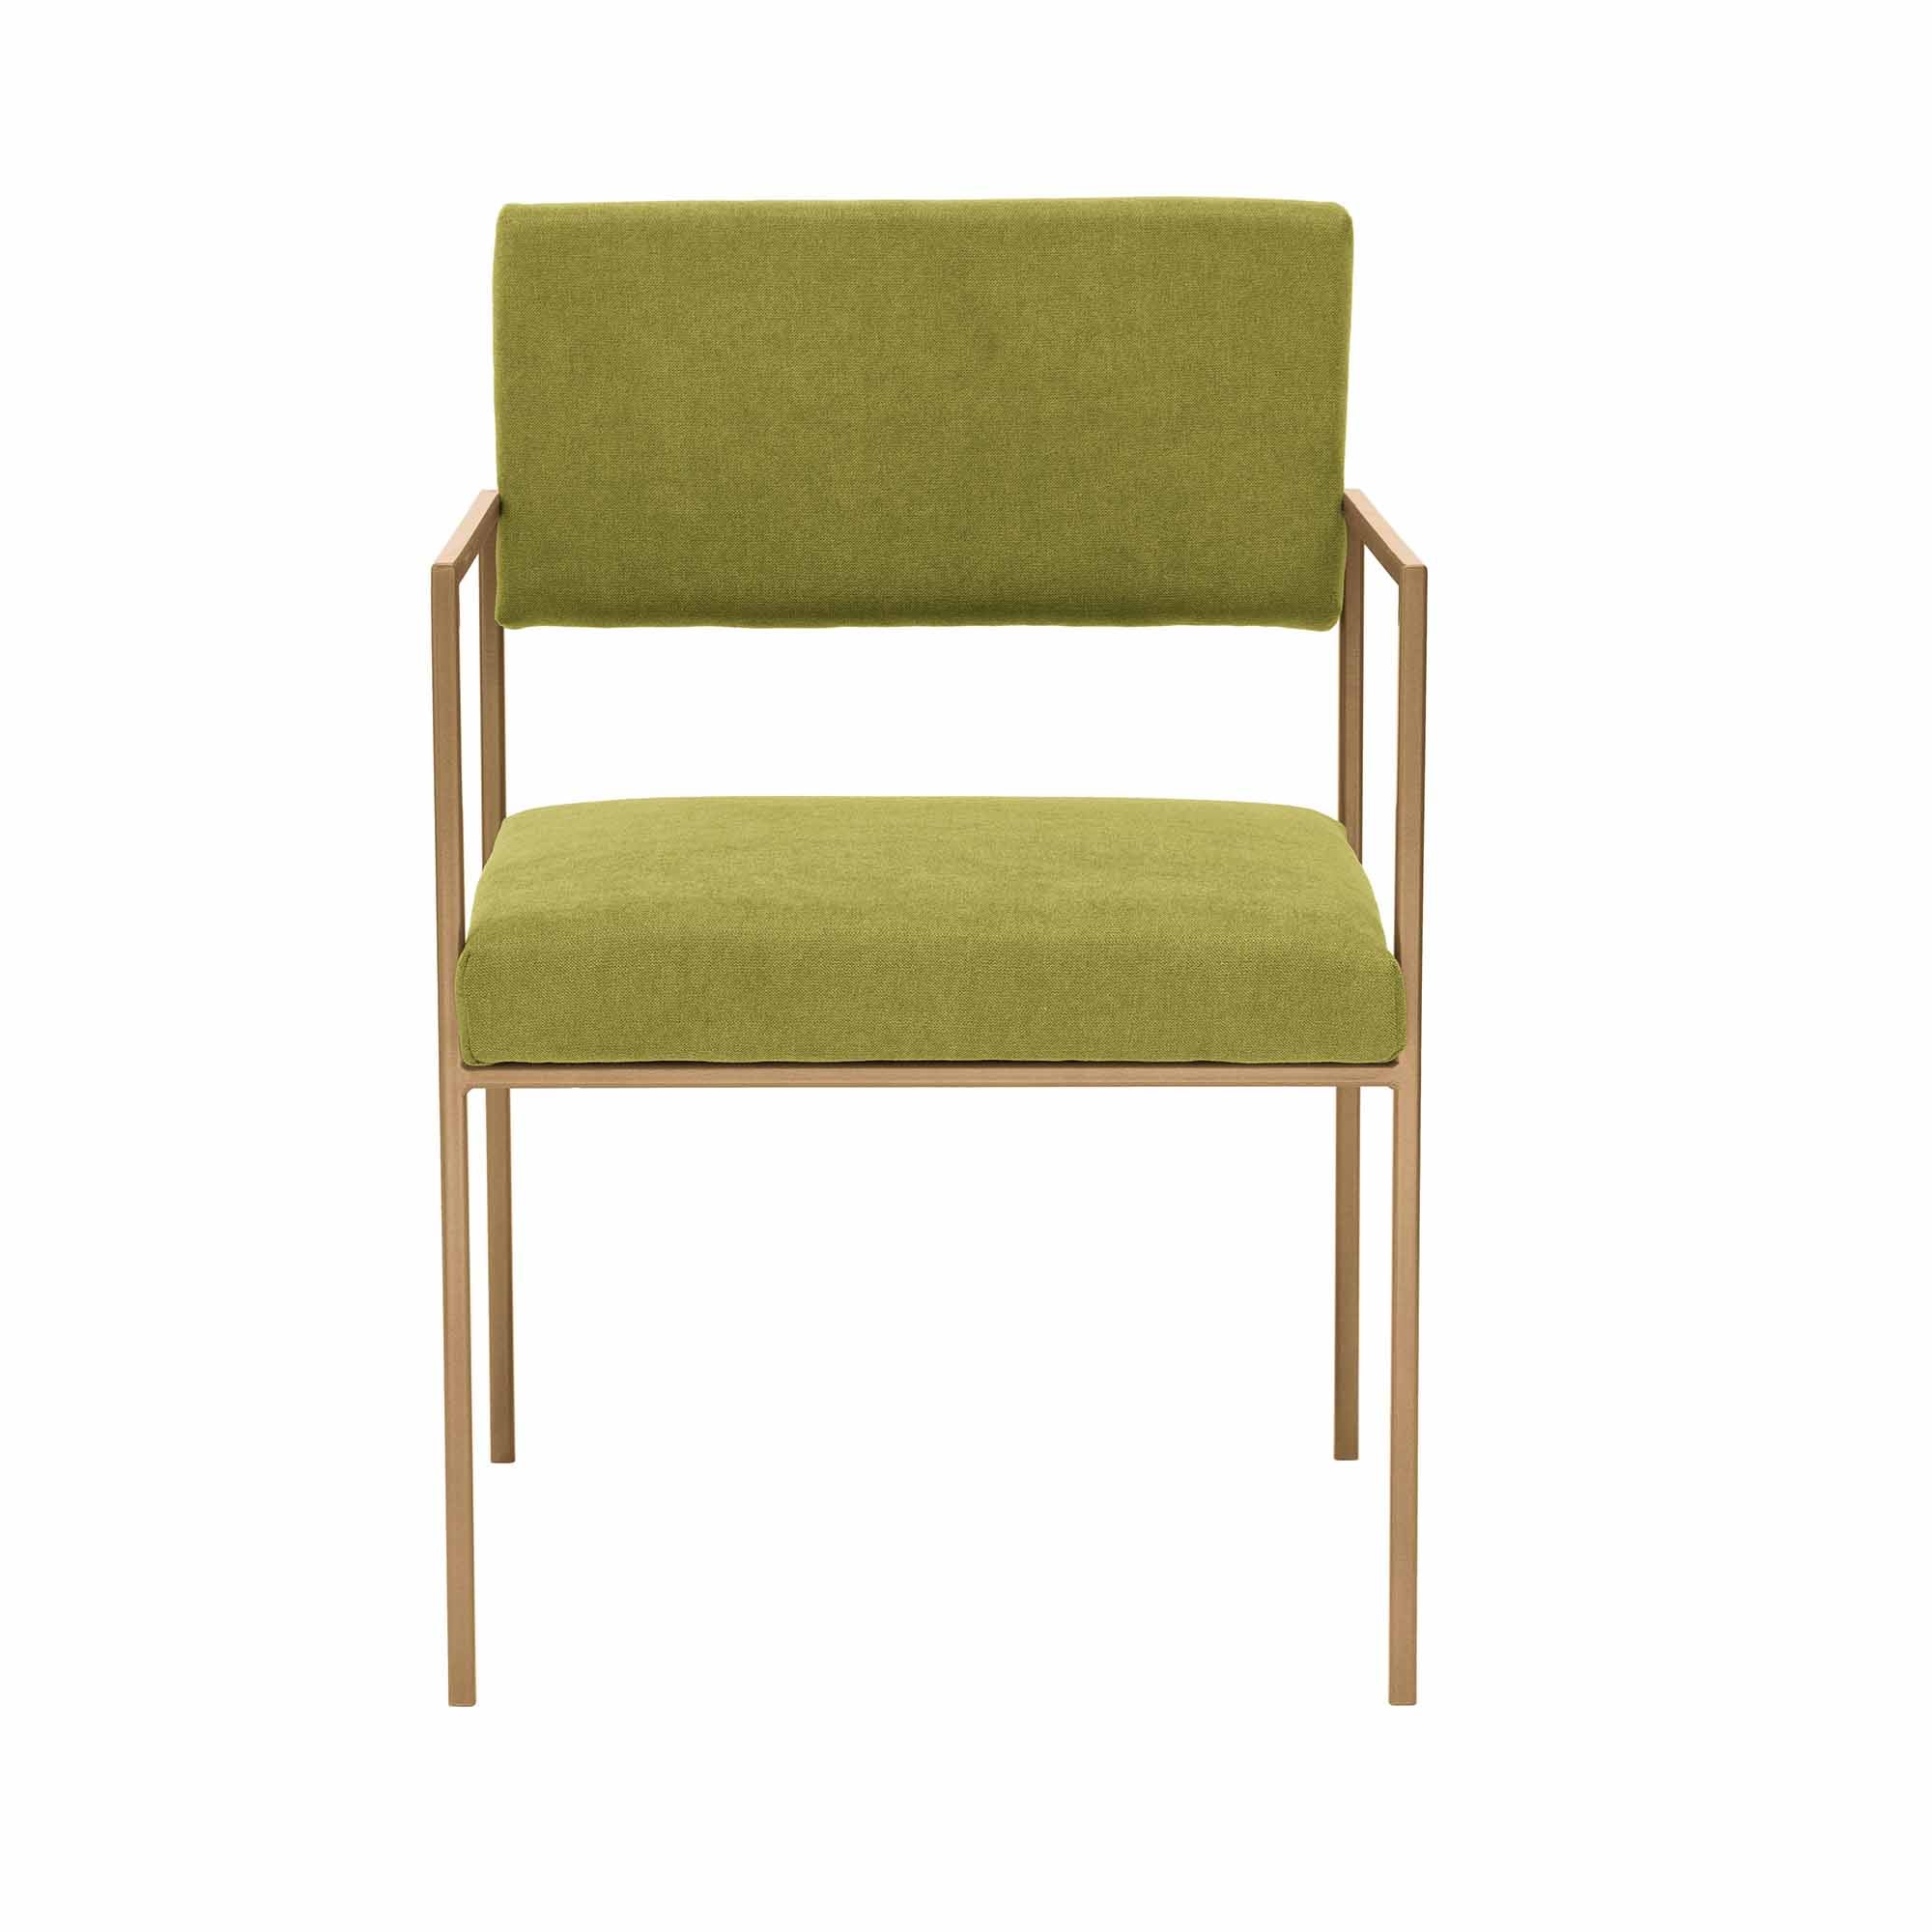 CUBE Armchair, Powder-Coated Steel Frame front view green fabric, yellow frame